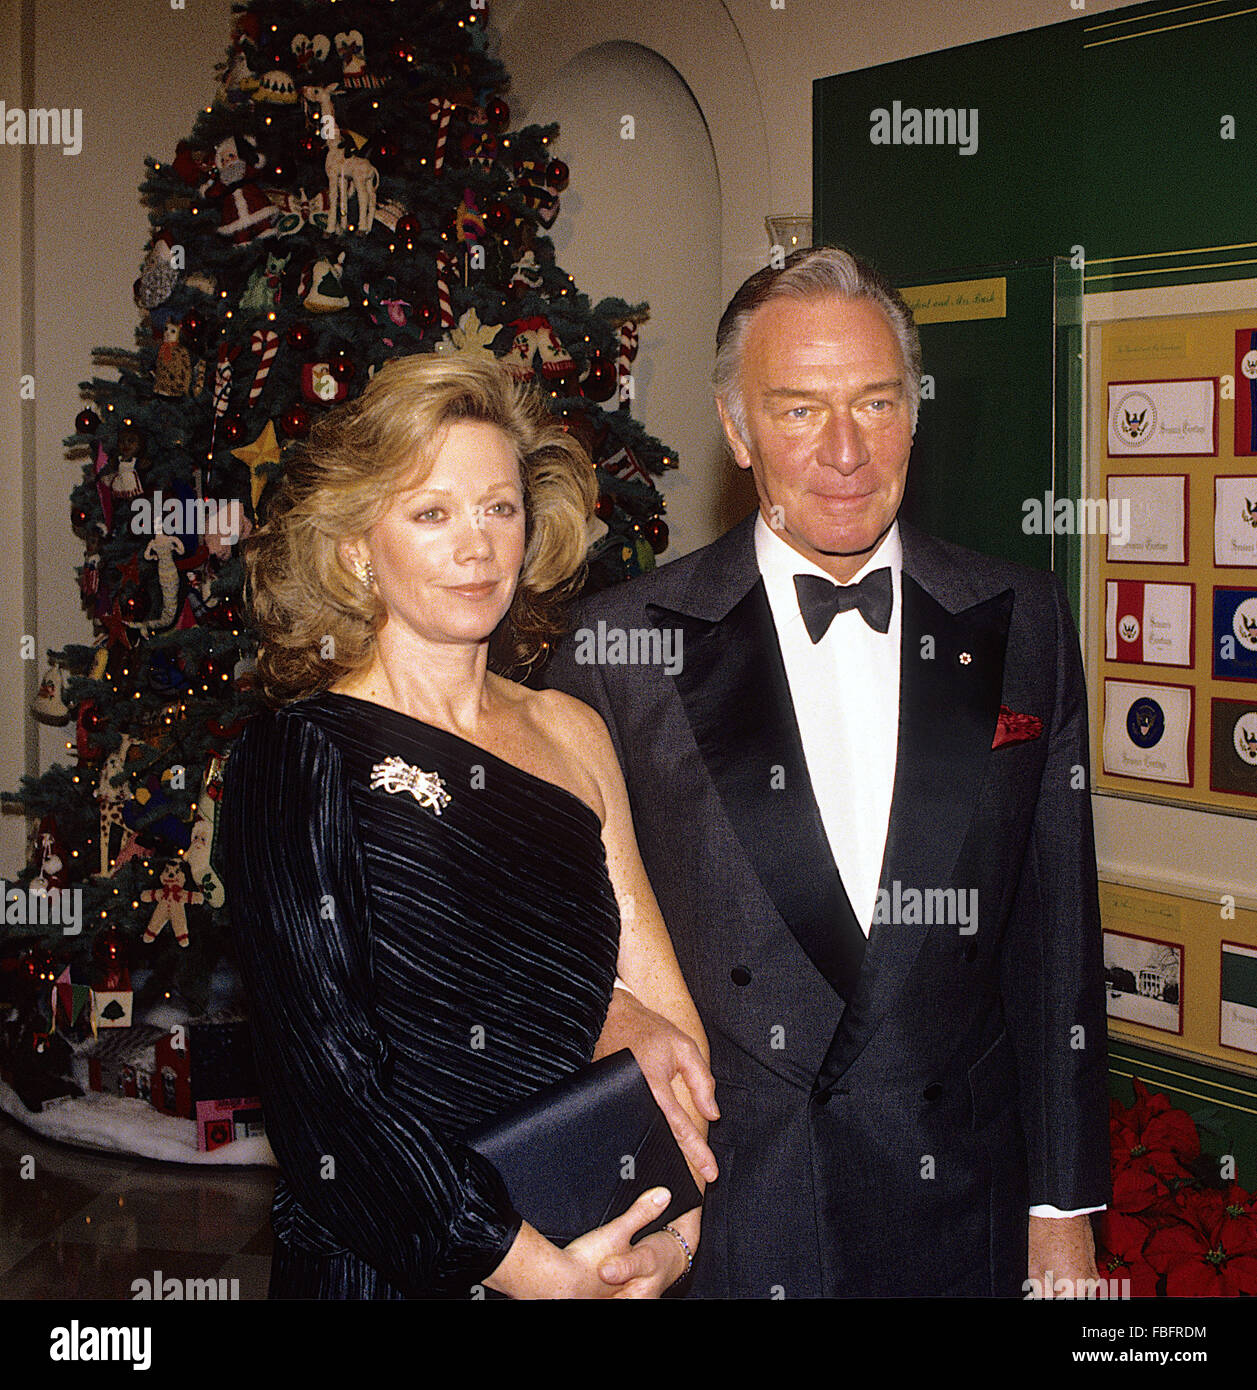 Washington, DC., USA, 6th December, 1992 Christopher Plummer and wife Elaine arrive at the White House for the Kennedy Center Honors. Arthur Christopher Orme Plummer  is a Canadian theater, film and television actor. He made his film debut in 1958's Stage Struck, and notable film performances include The Sound of Music , The Night of the Generals, Murder by Decree, The Return of the Pink Panther, Star Trek VI: The Undiscovered Country, The Man Who Would Be King, The Insider and 1969 cult classic Lock Up Your Daughters. Credit: Mark Reinstein Stock Photo